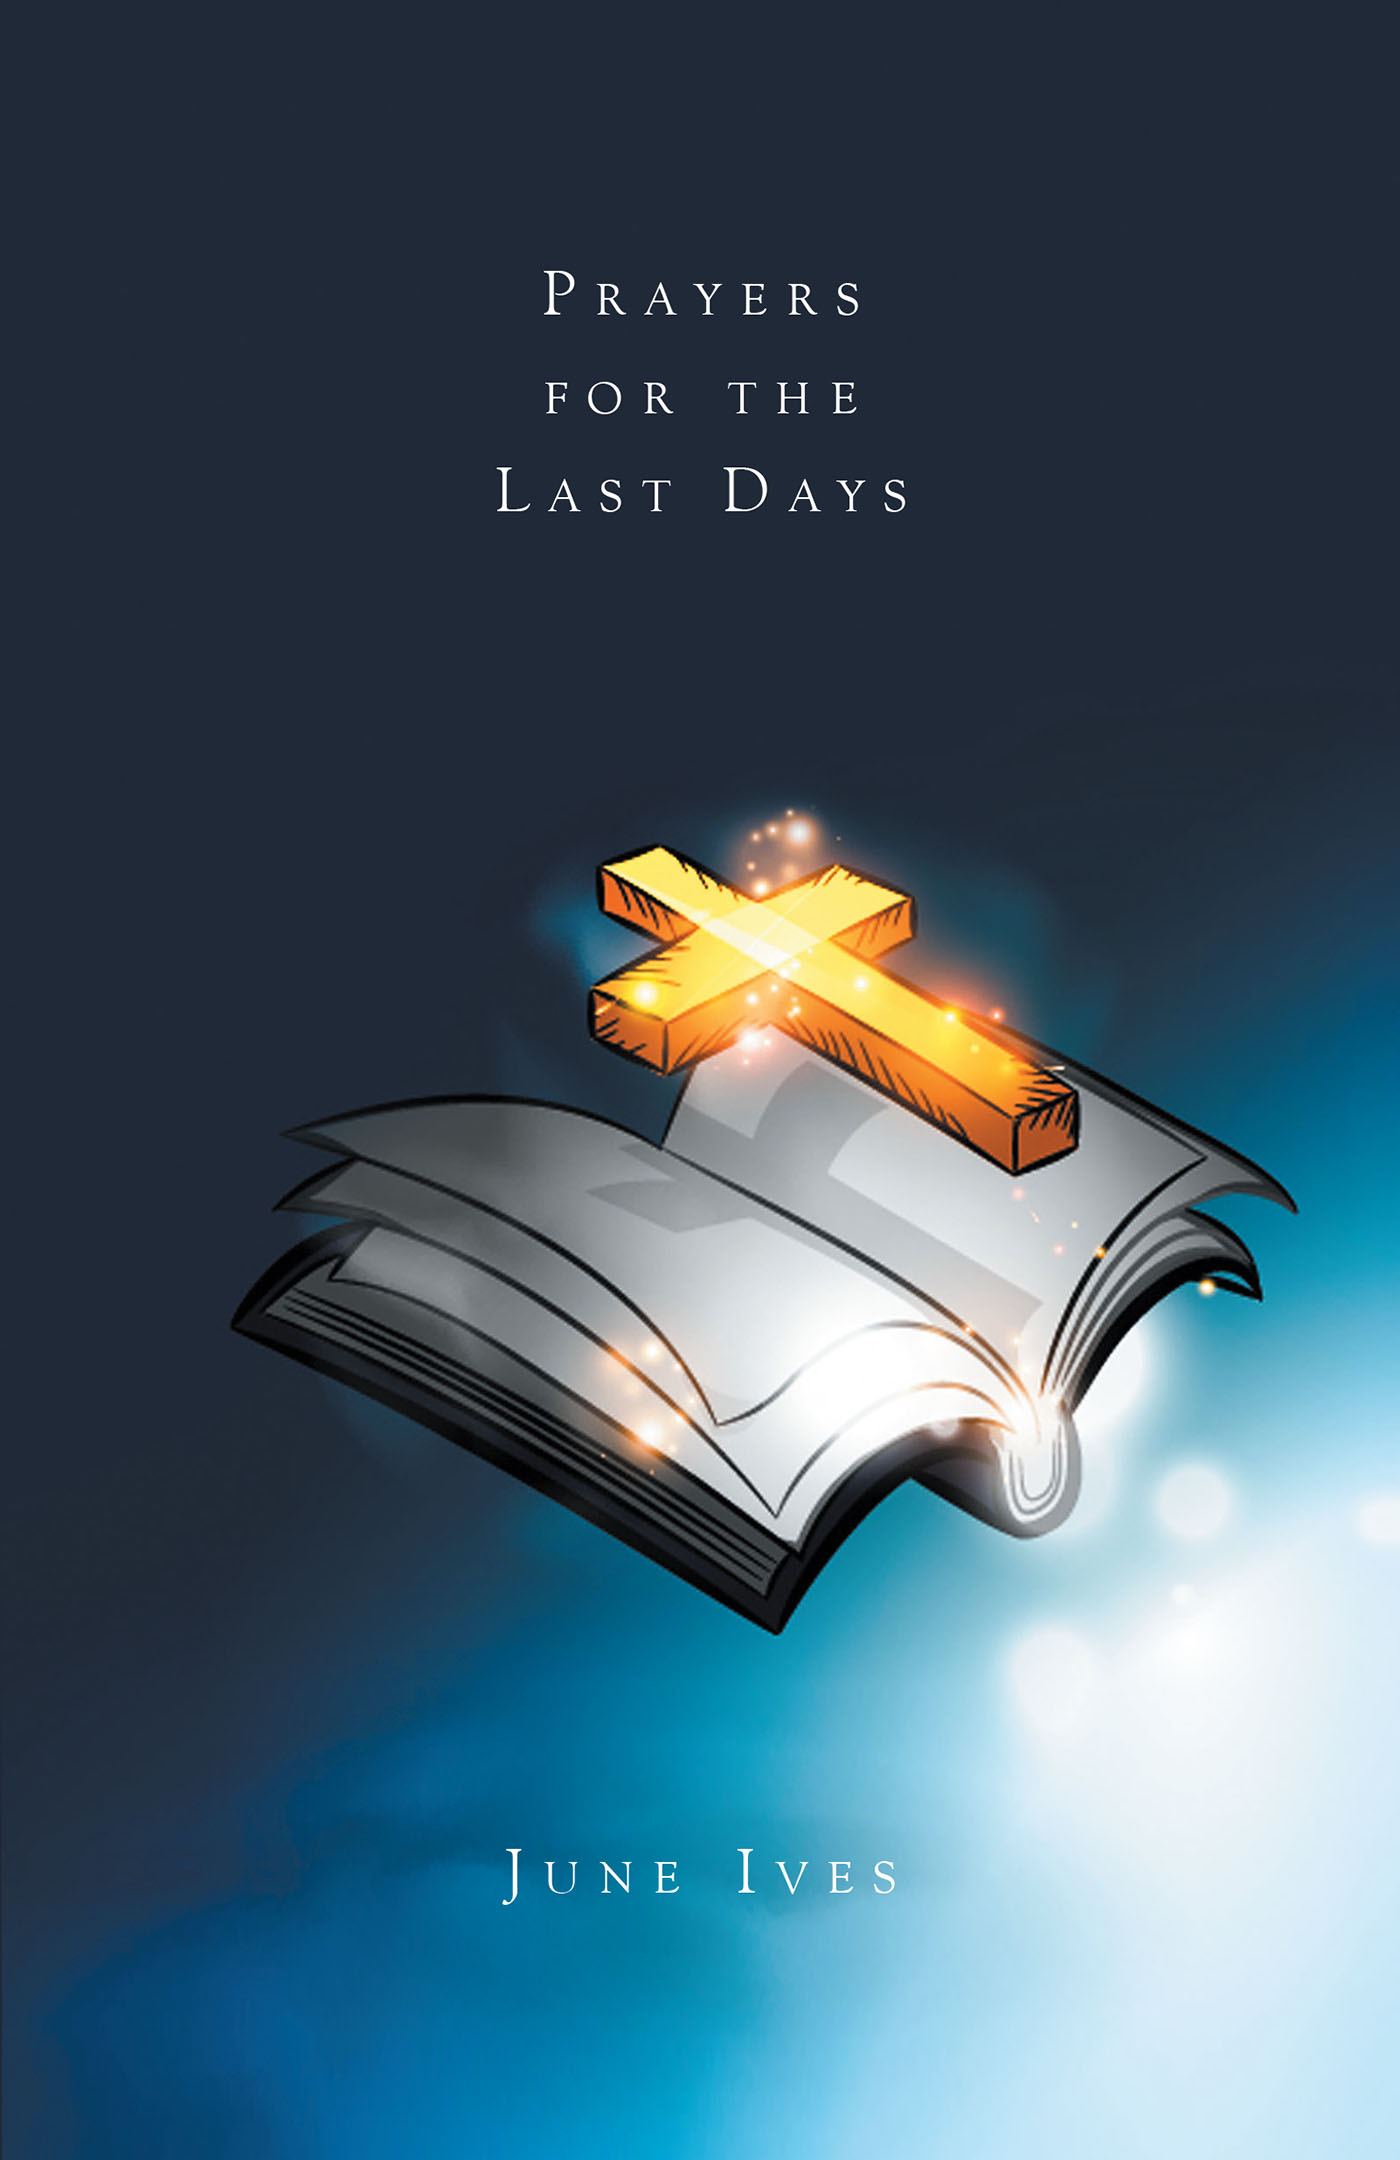 June Ives’s Newly Released "Prayers for the Last Days" is a Heartfelt Collection of Prayers That Will Inspire and Inform Believers